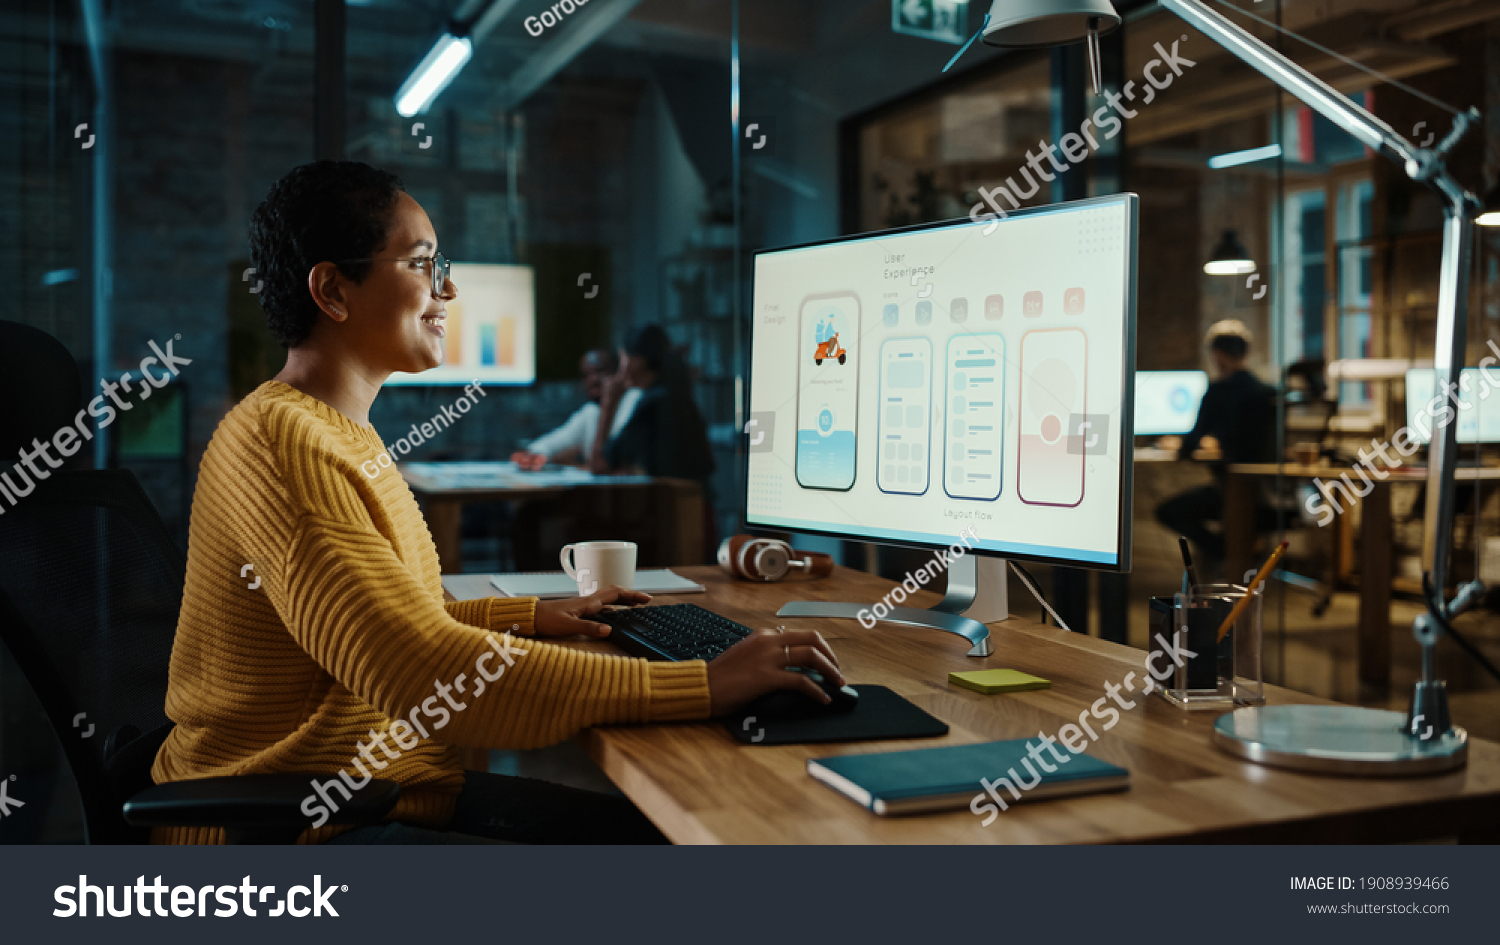 Young Latina Designer Working on a Desktop Computer in Creative Office. Beautiful Diverse Multiethnic Female is Developing a New App Design and User Interface in a Digital Graphics Editing Software. #1908939466